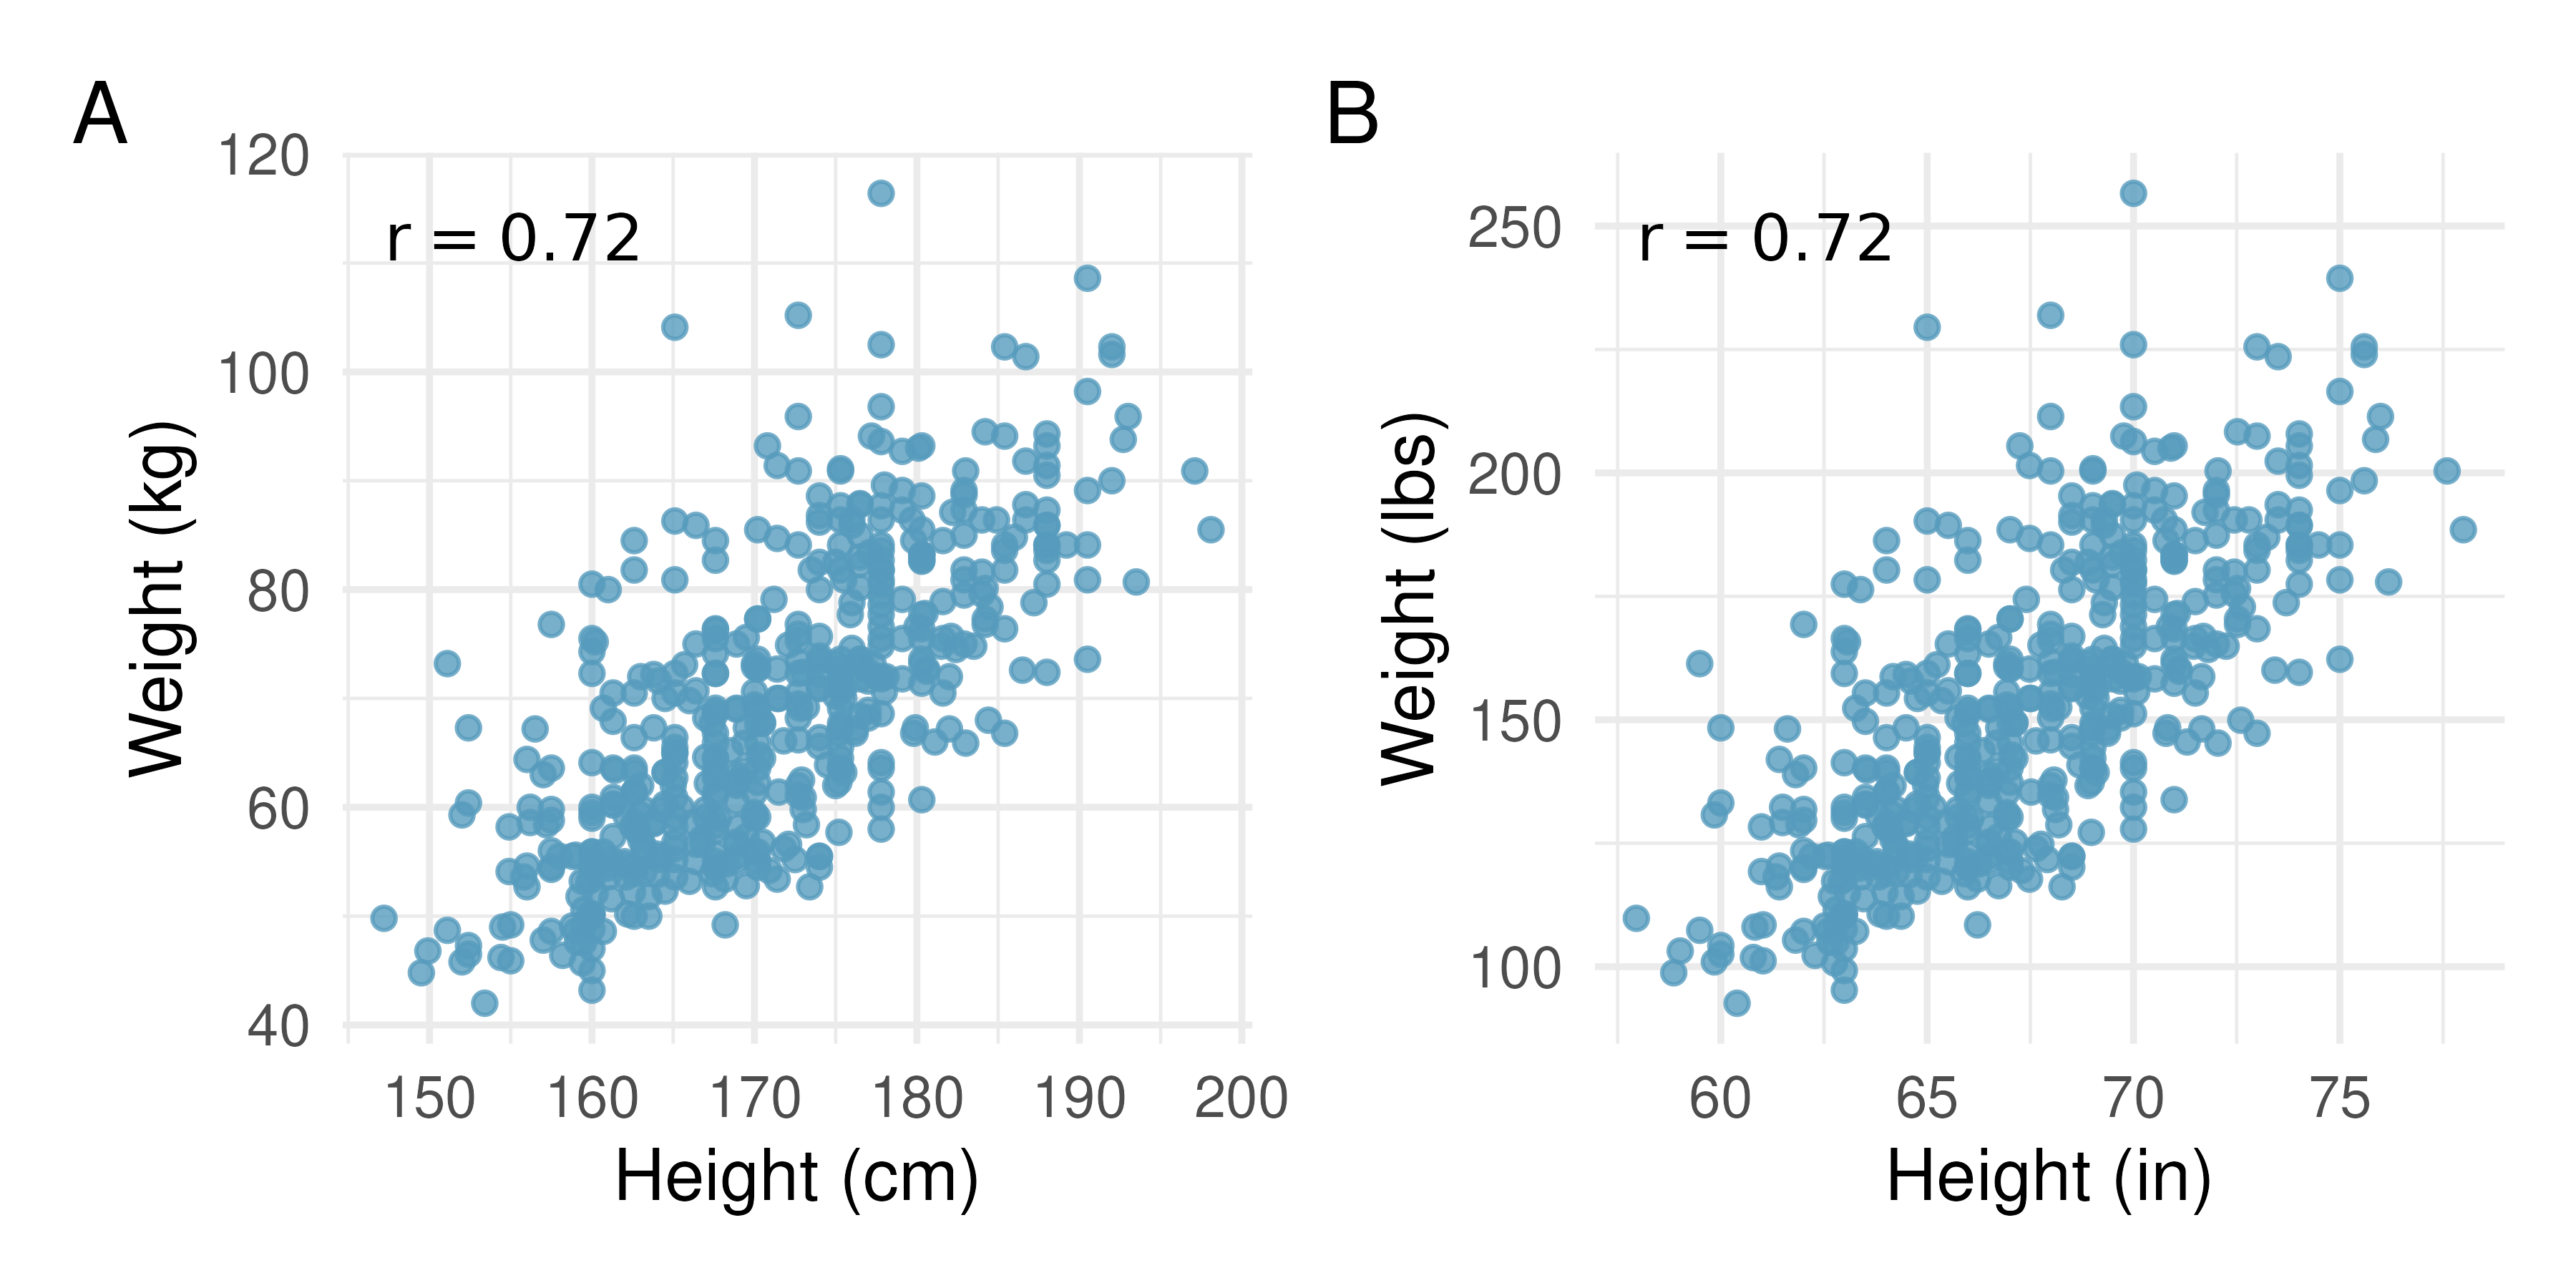 Two scatterplots, both displaying the relationship between weights and heights of 507 physically healthy adults. In Plot A, the units are kilograms and centimeters. In Plot B, the units are pounds and inches. Also noted on both plots is the correlation coefficient, $r = 0.72.$